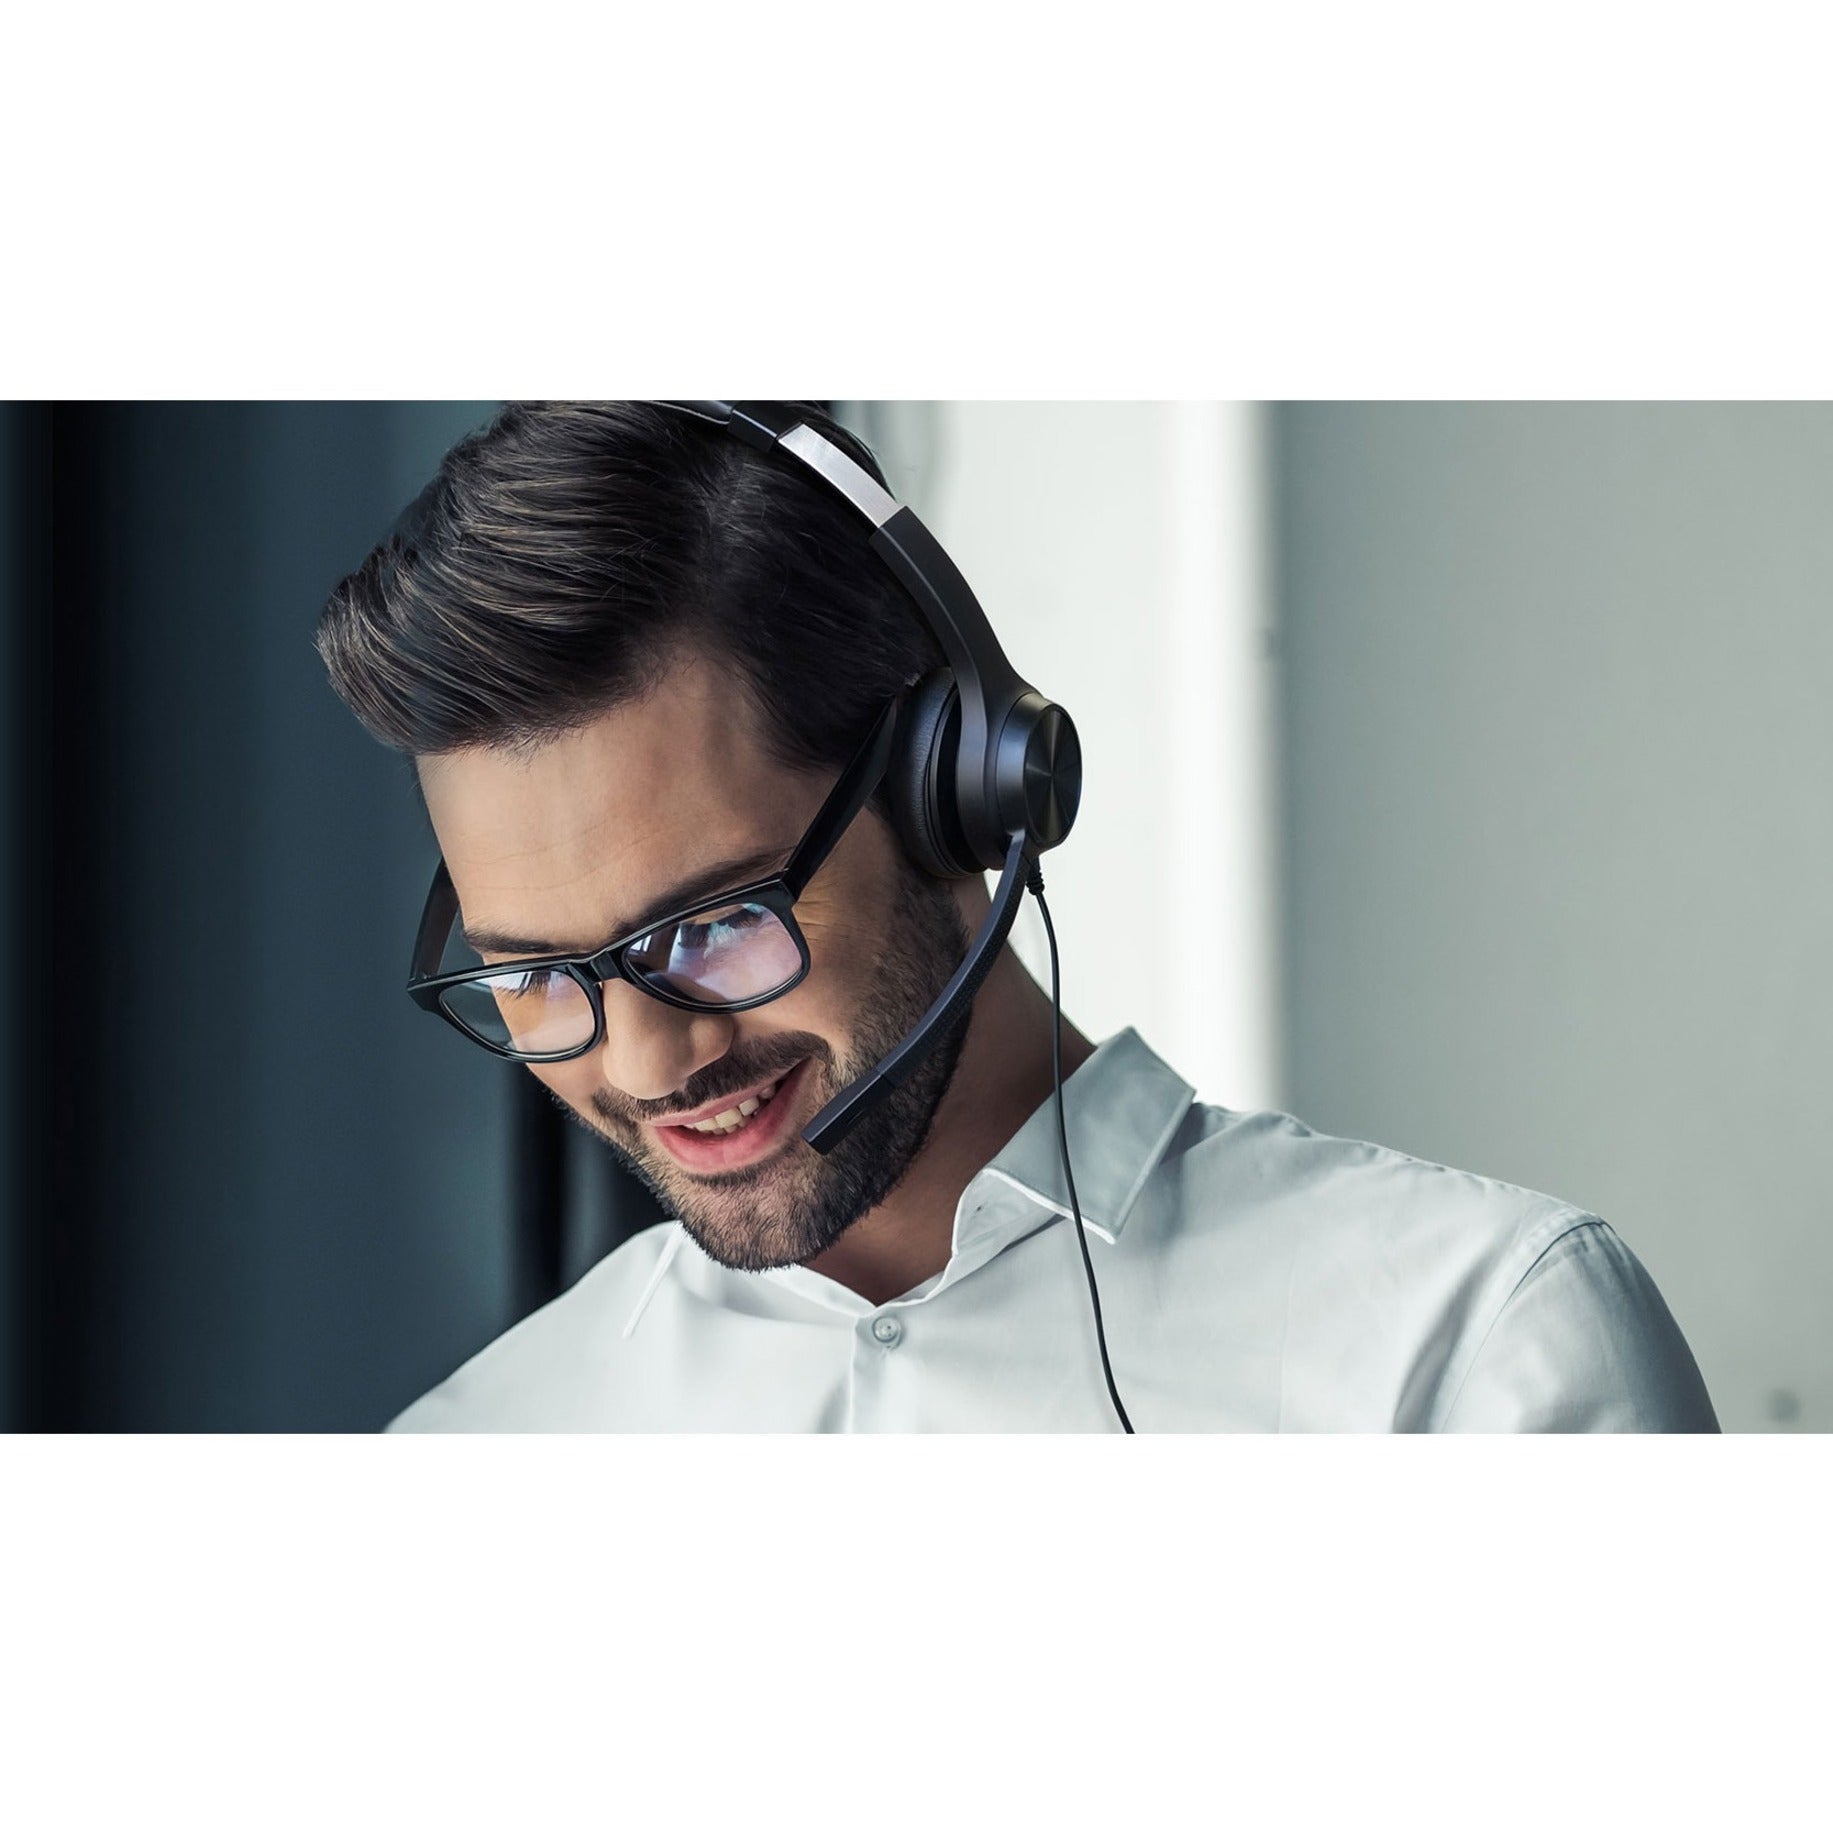 Creative 51EF0980AA000 Chat USB Headset, Comfortable Lightweight On-ear Headset with Swivel Microphone Mute